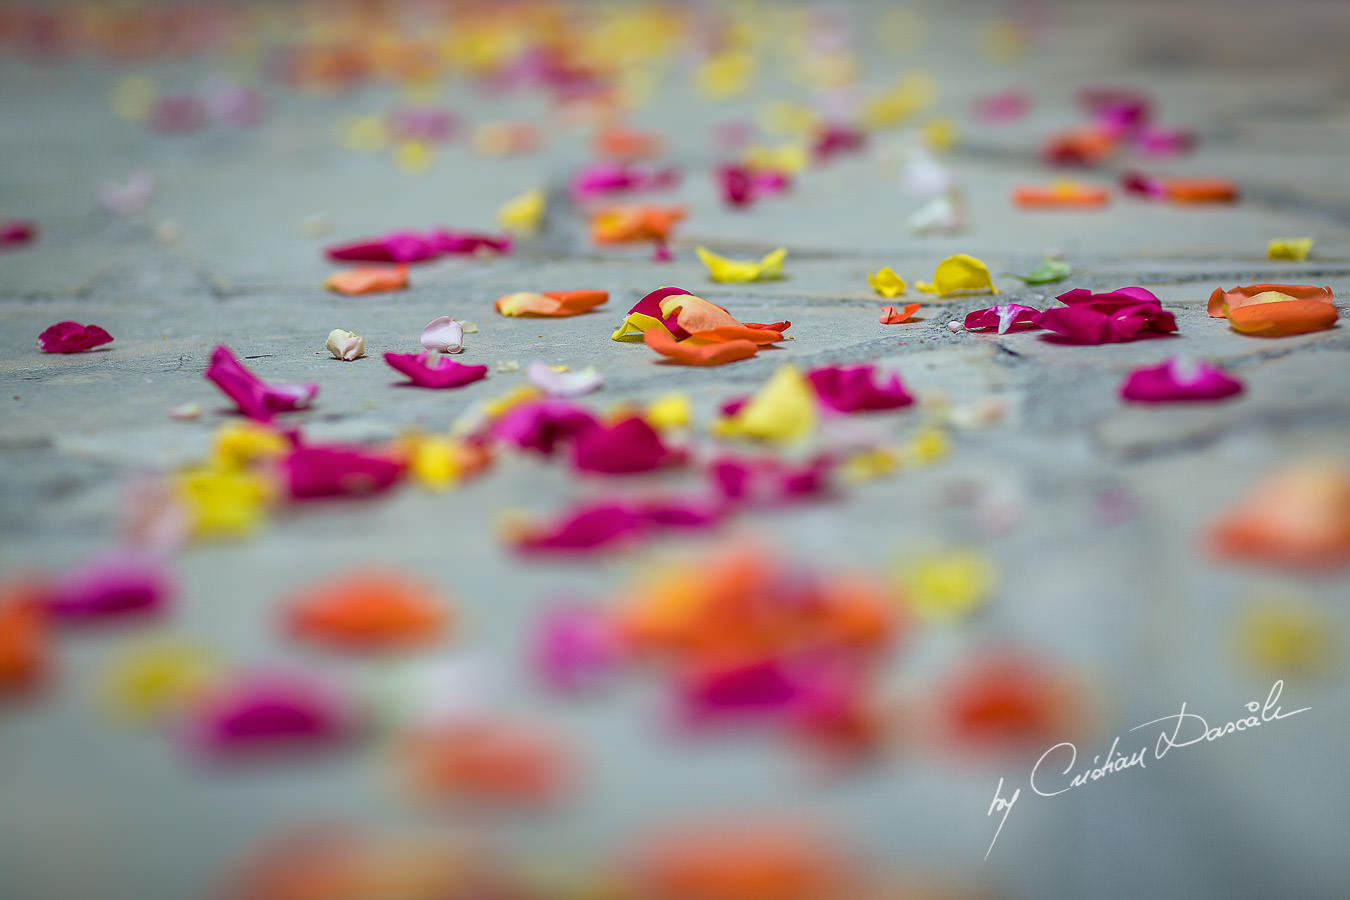 A beautiful wedding day at the Vasilias Nikoklis Inn in Paphos, captured by Cristian Dascalu. Rose petal thrown for the bride's arrival.